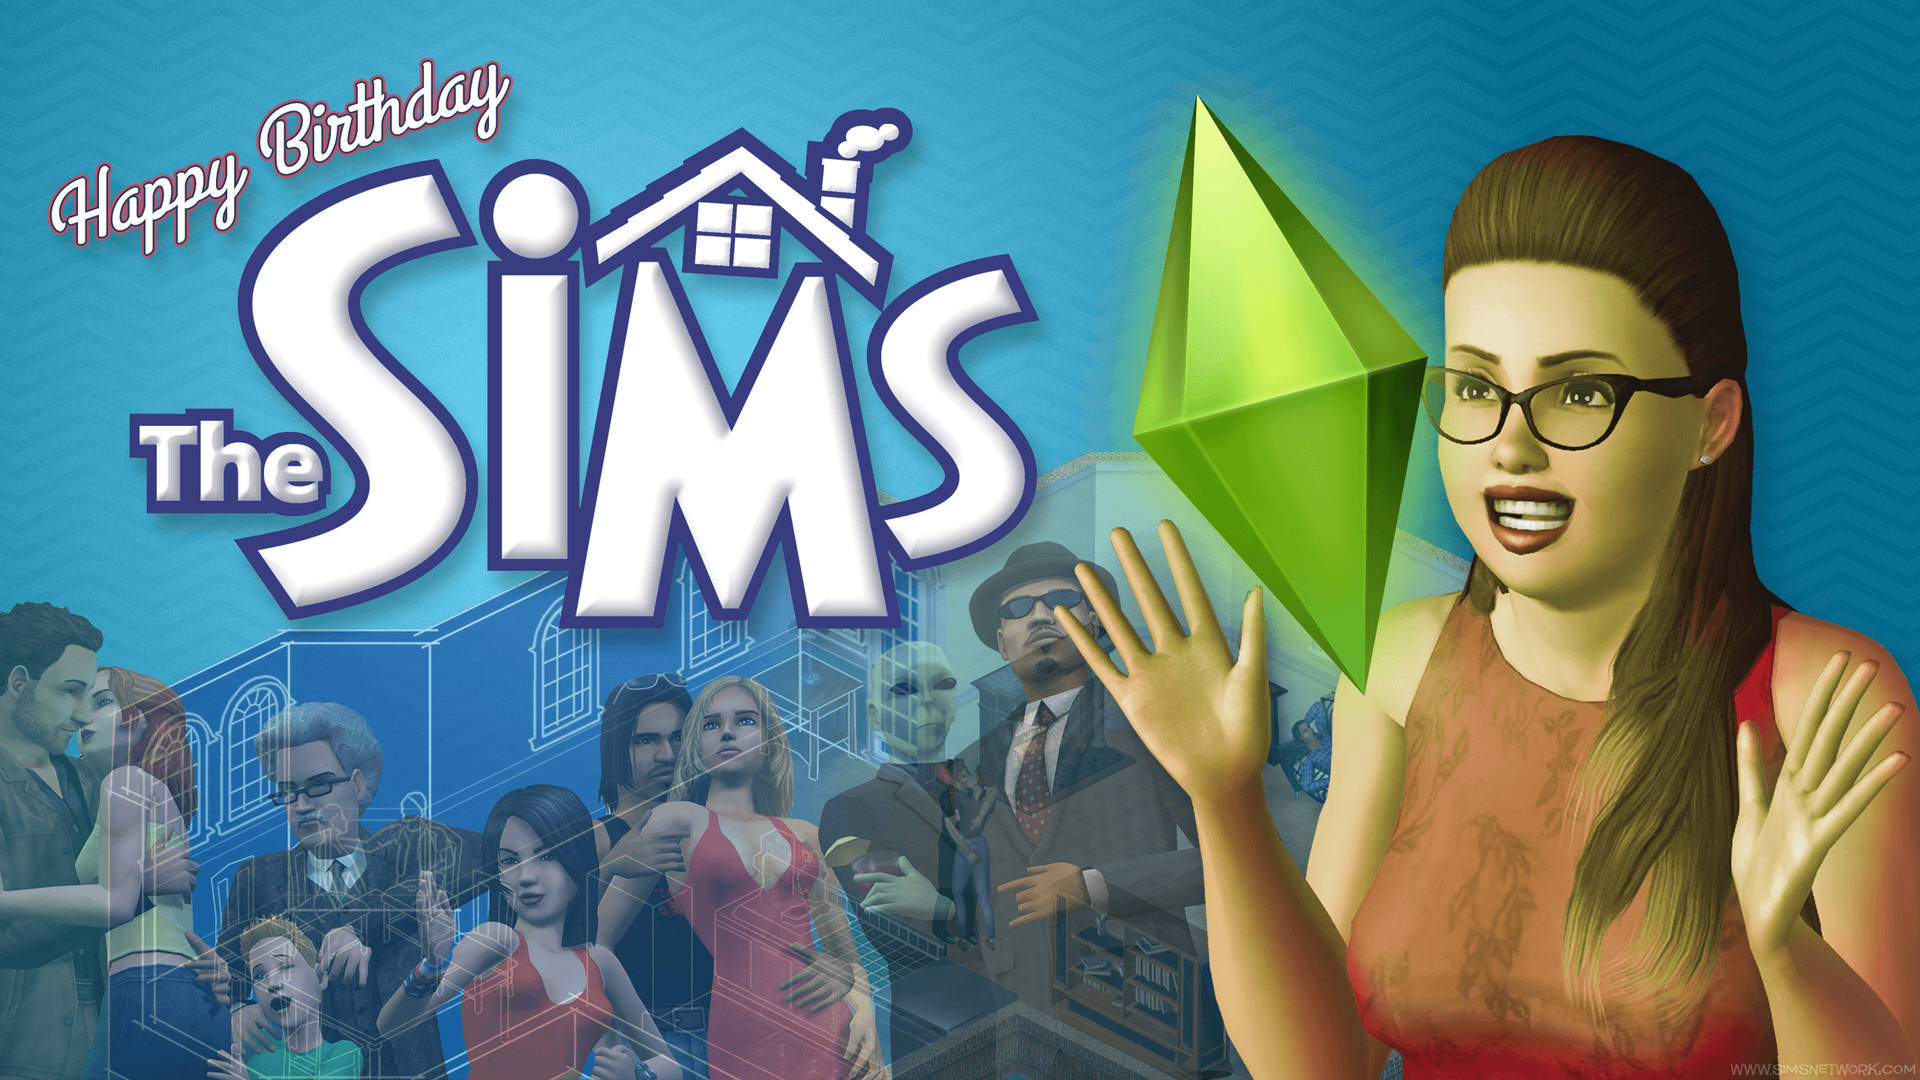 The Sims Lady With Eyeglasses Wallpaper